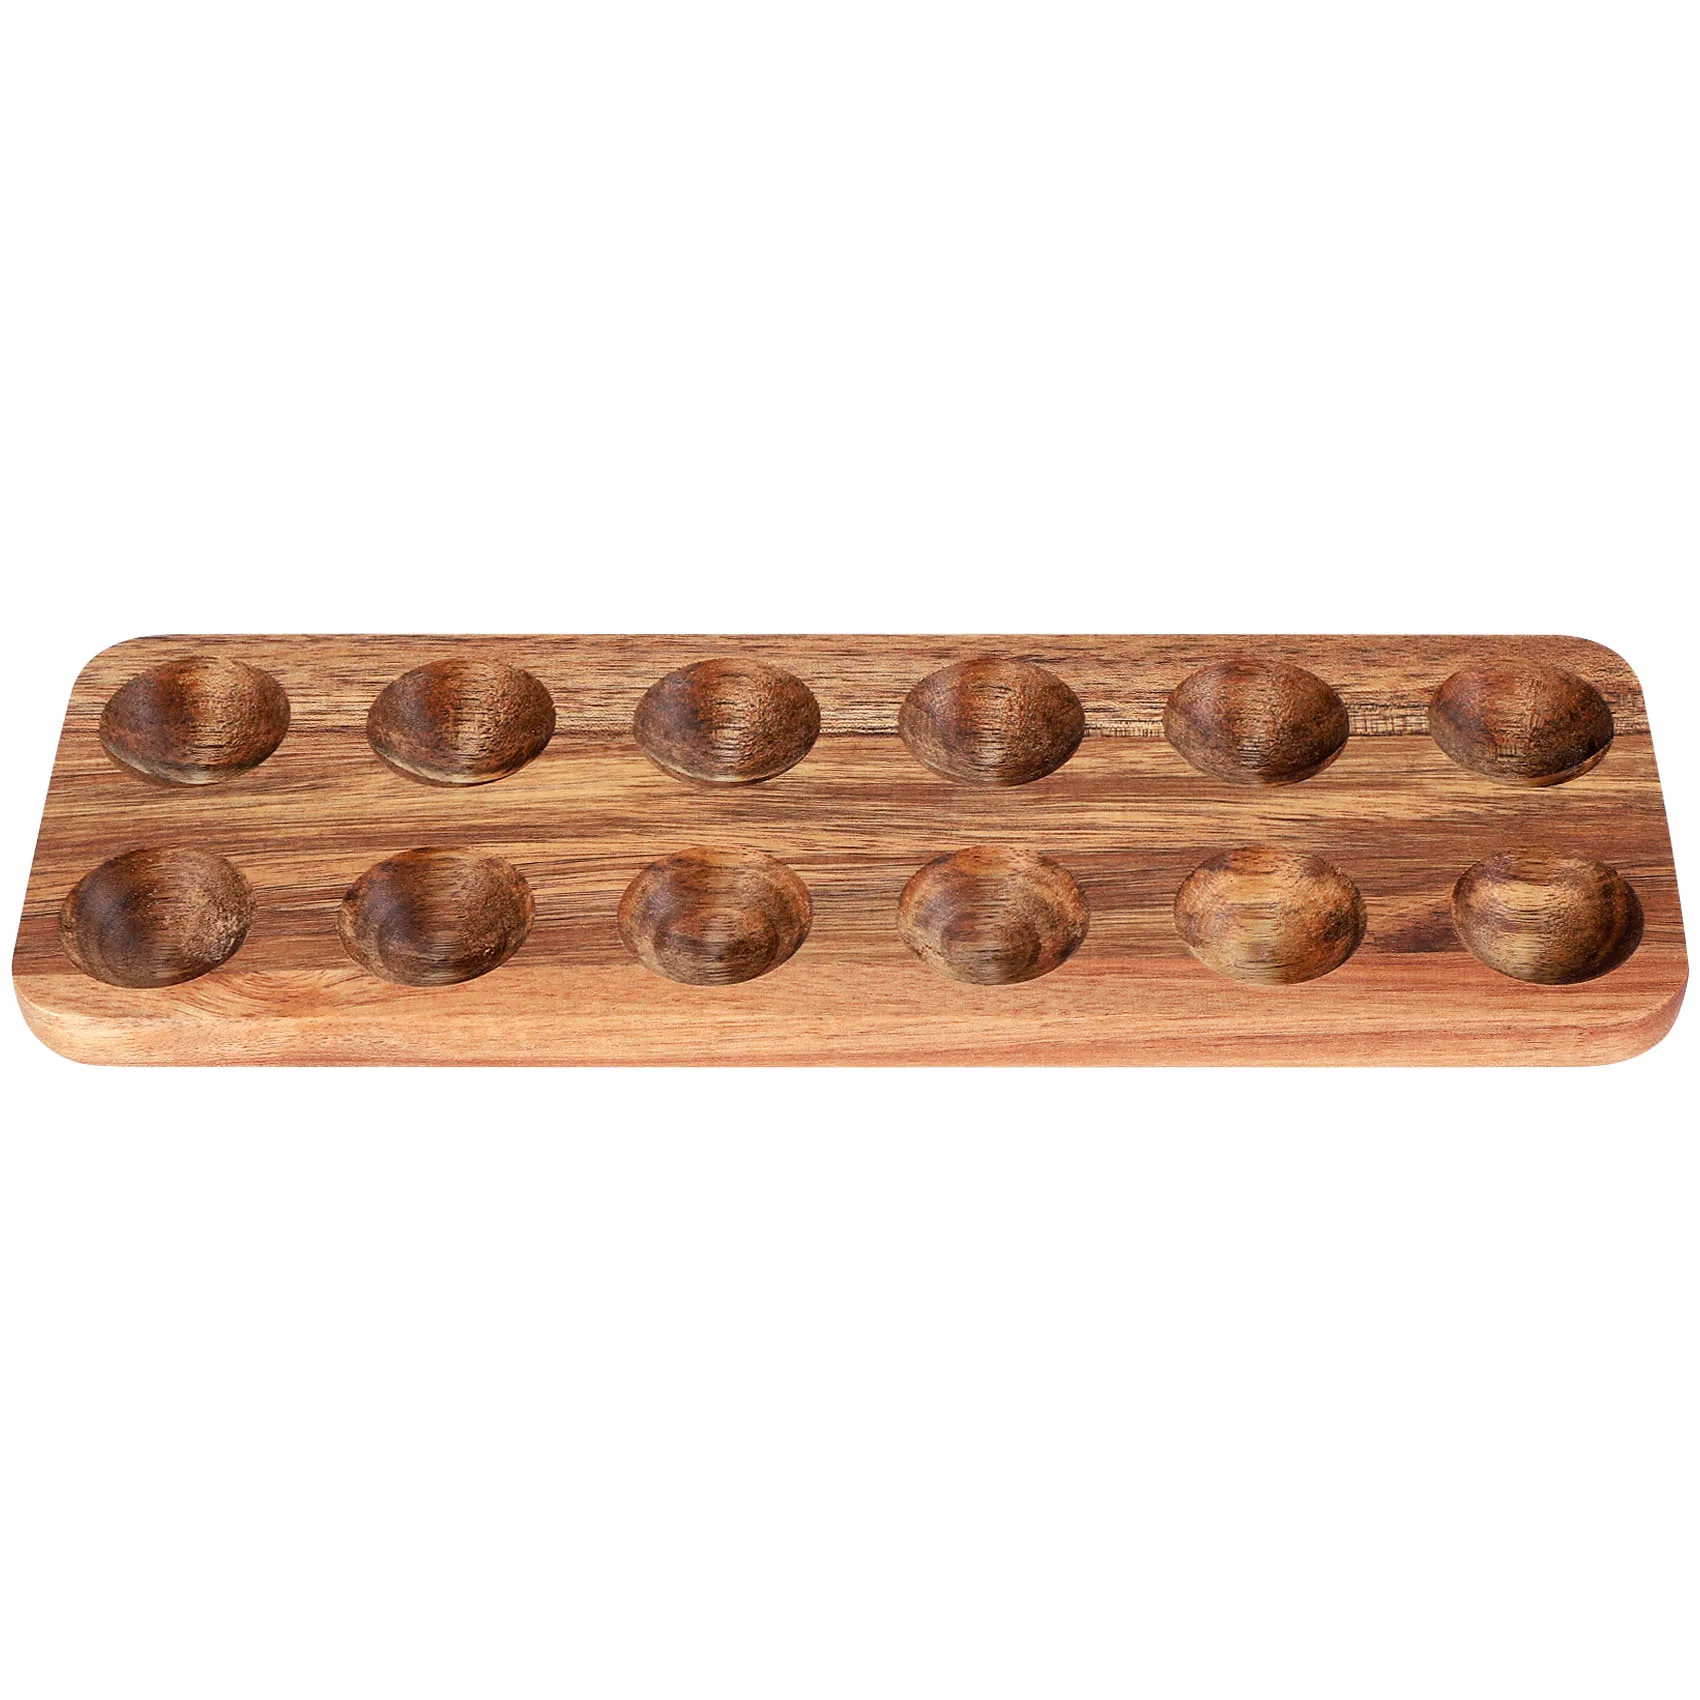 

12 Holes Japanese Style Wooden Double Row Egg Storage Box Home Organizer Rack Eggs Holder Kitchen Decor Accessories